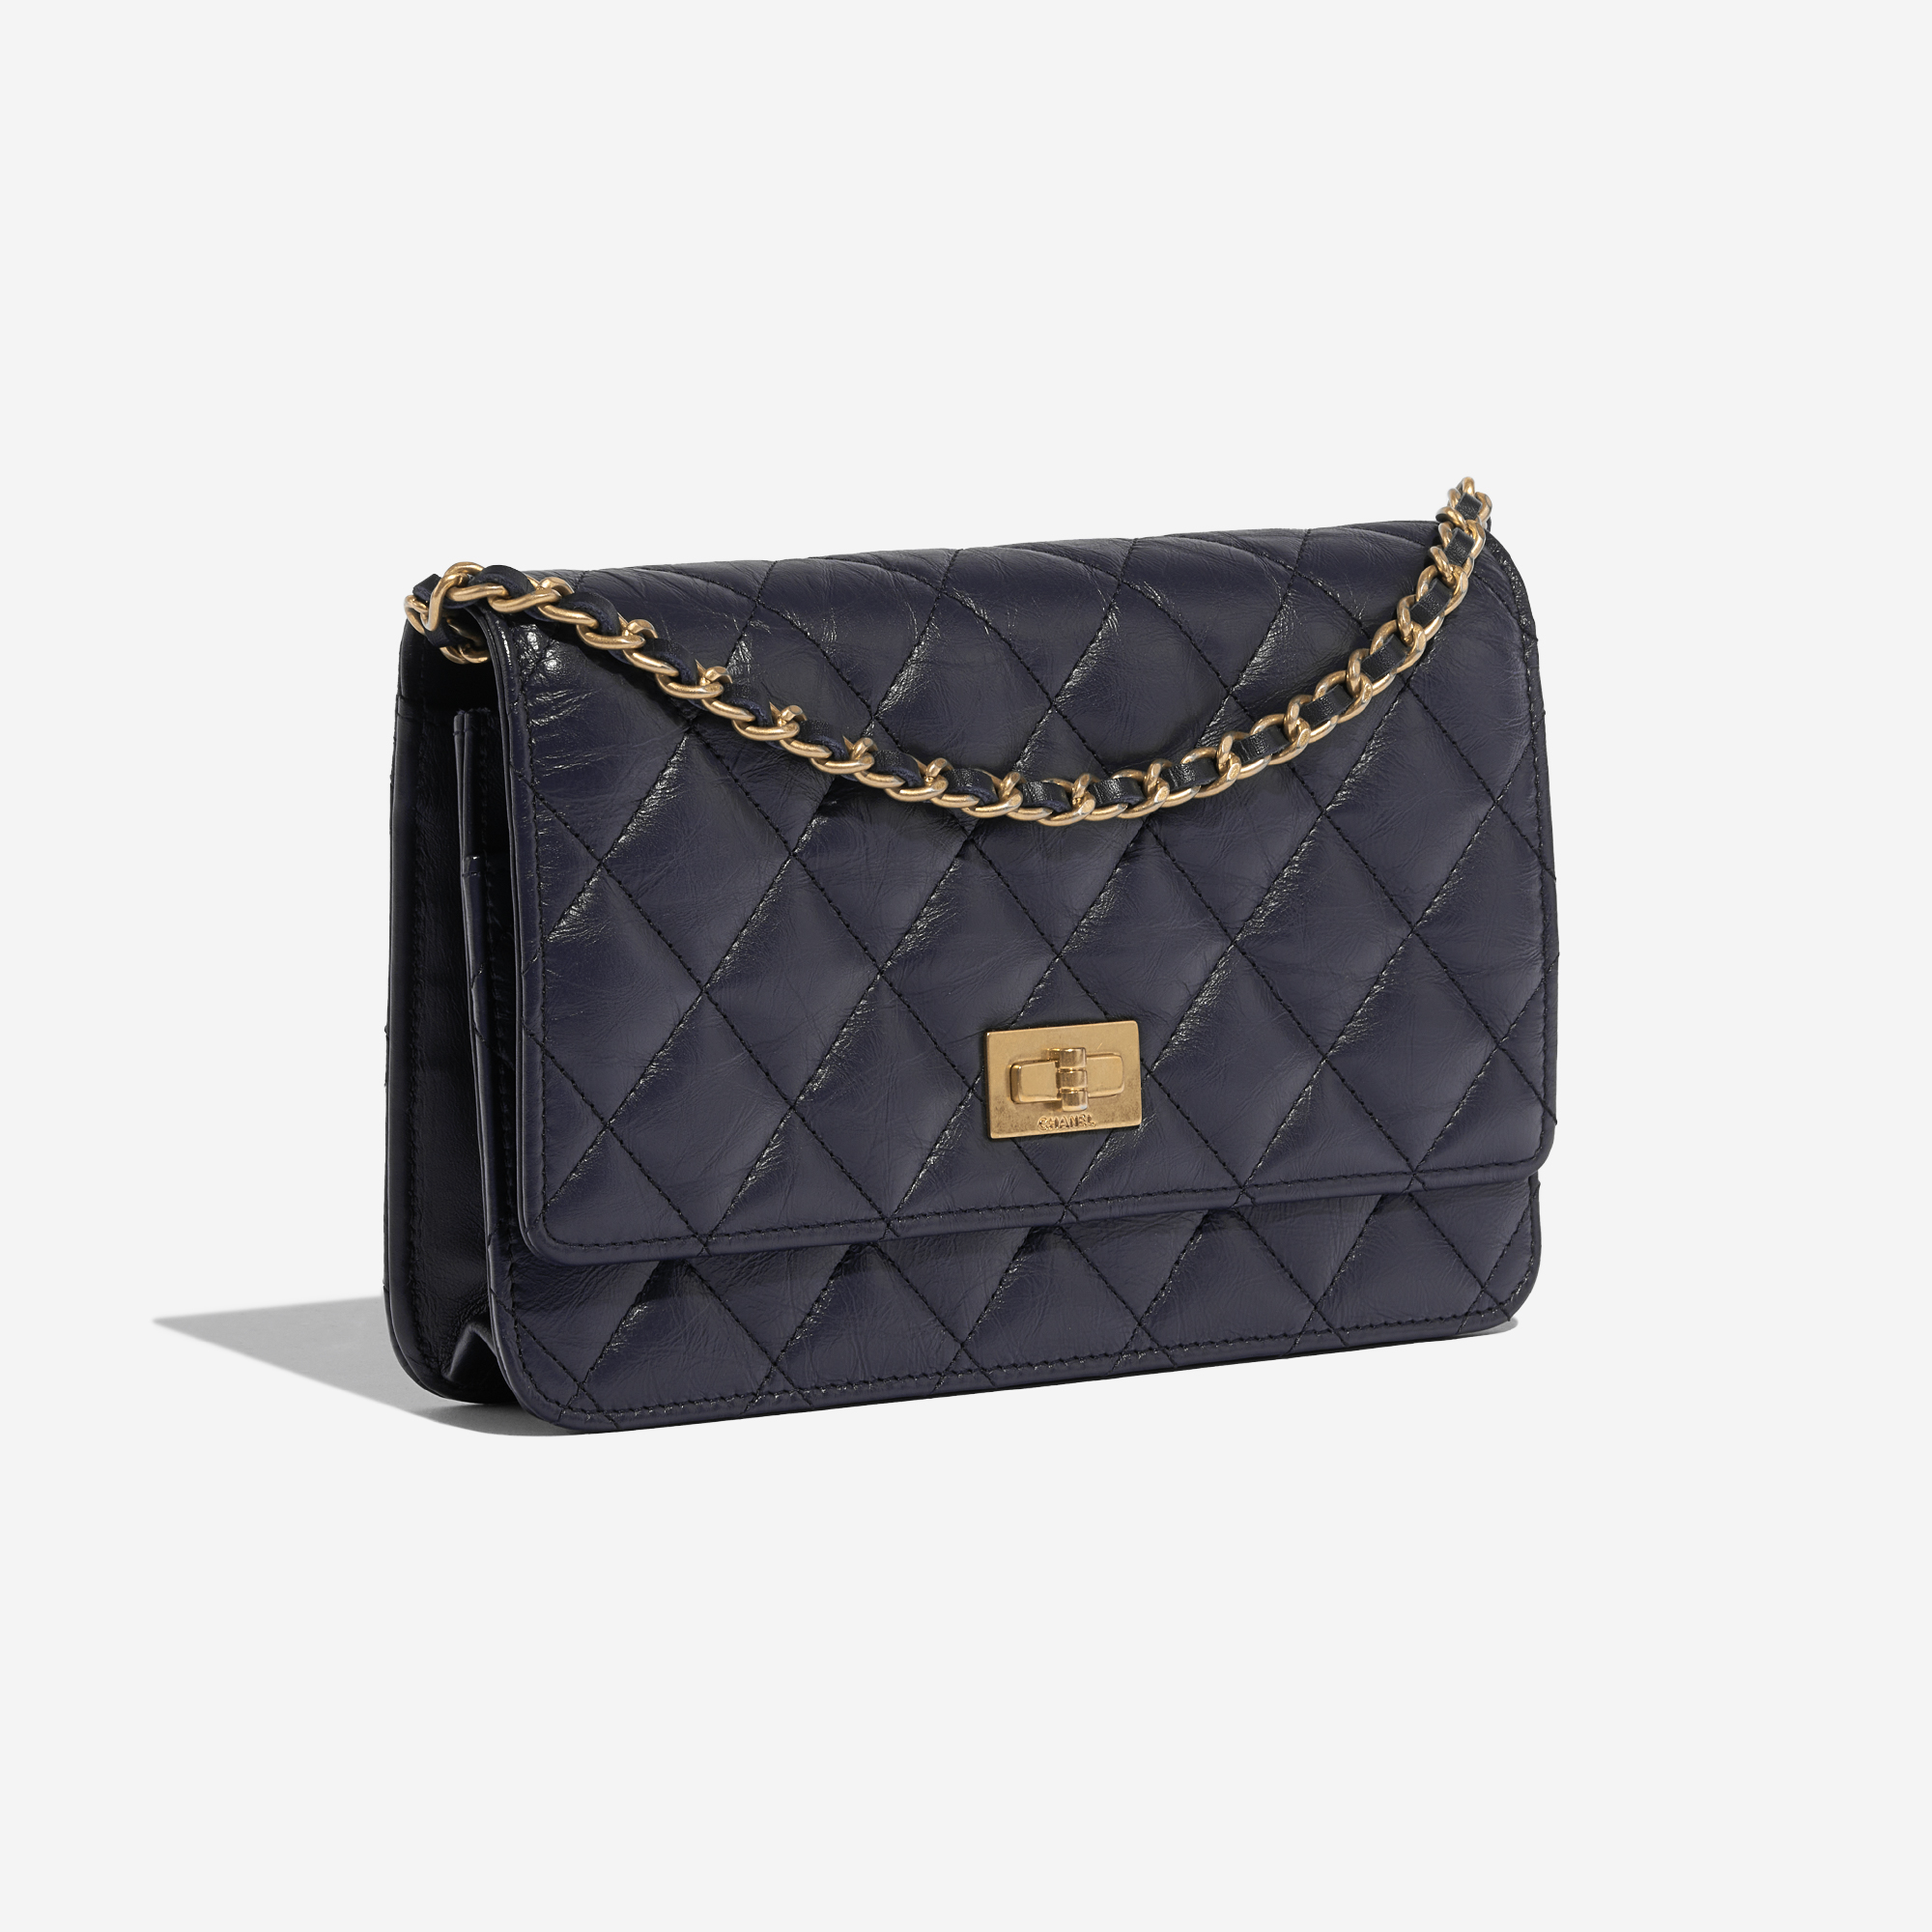 Pre-owned Chanel bag 2.55 Reissue WOC Aged Calf Navy Blue Blue Side Front | Sell your designer bag on Saclab.com